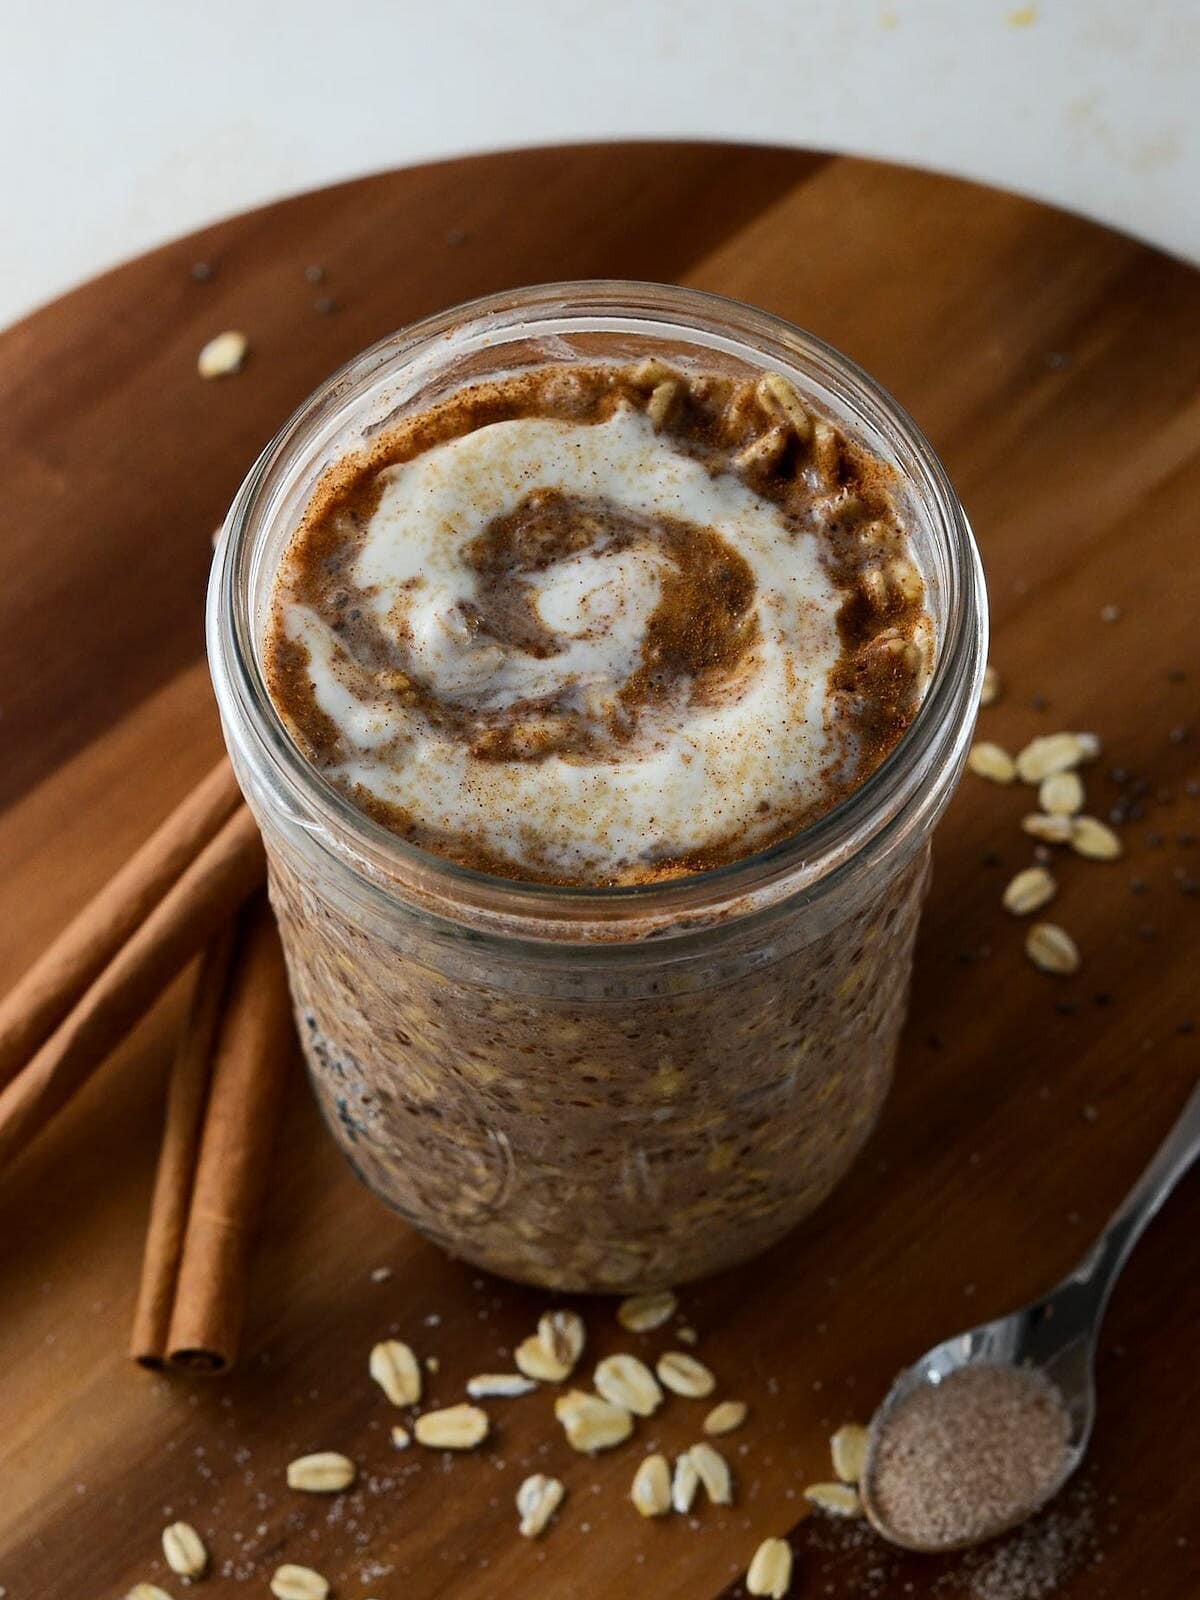 This is a photo of cinnamon roll overnight oats with a spoon and cinnamon sticks.